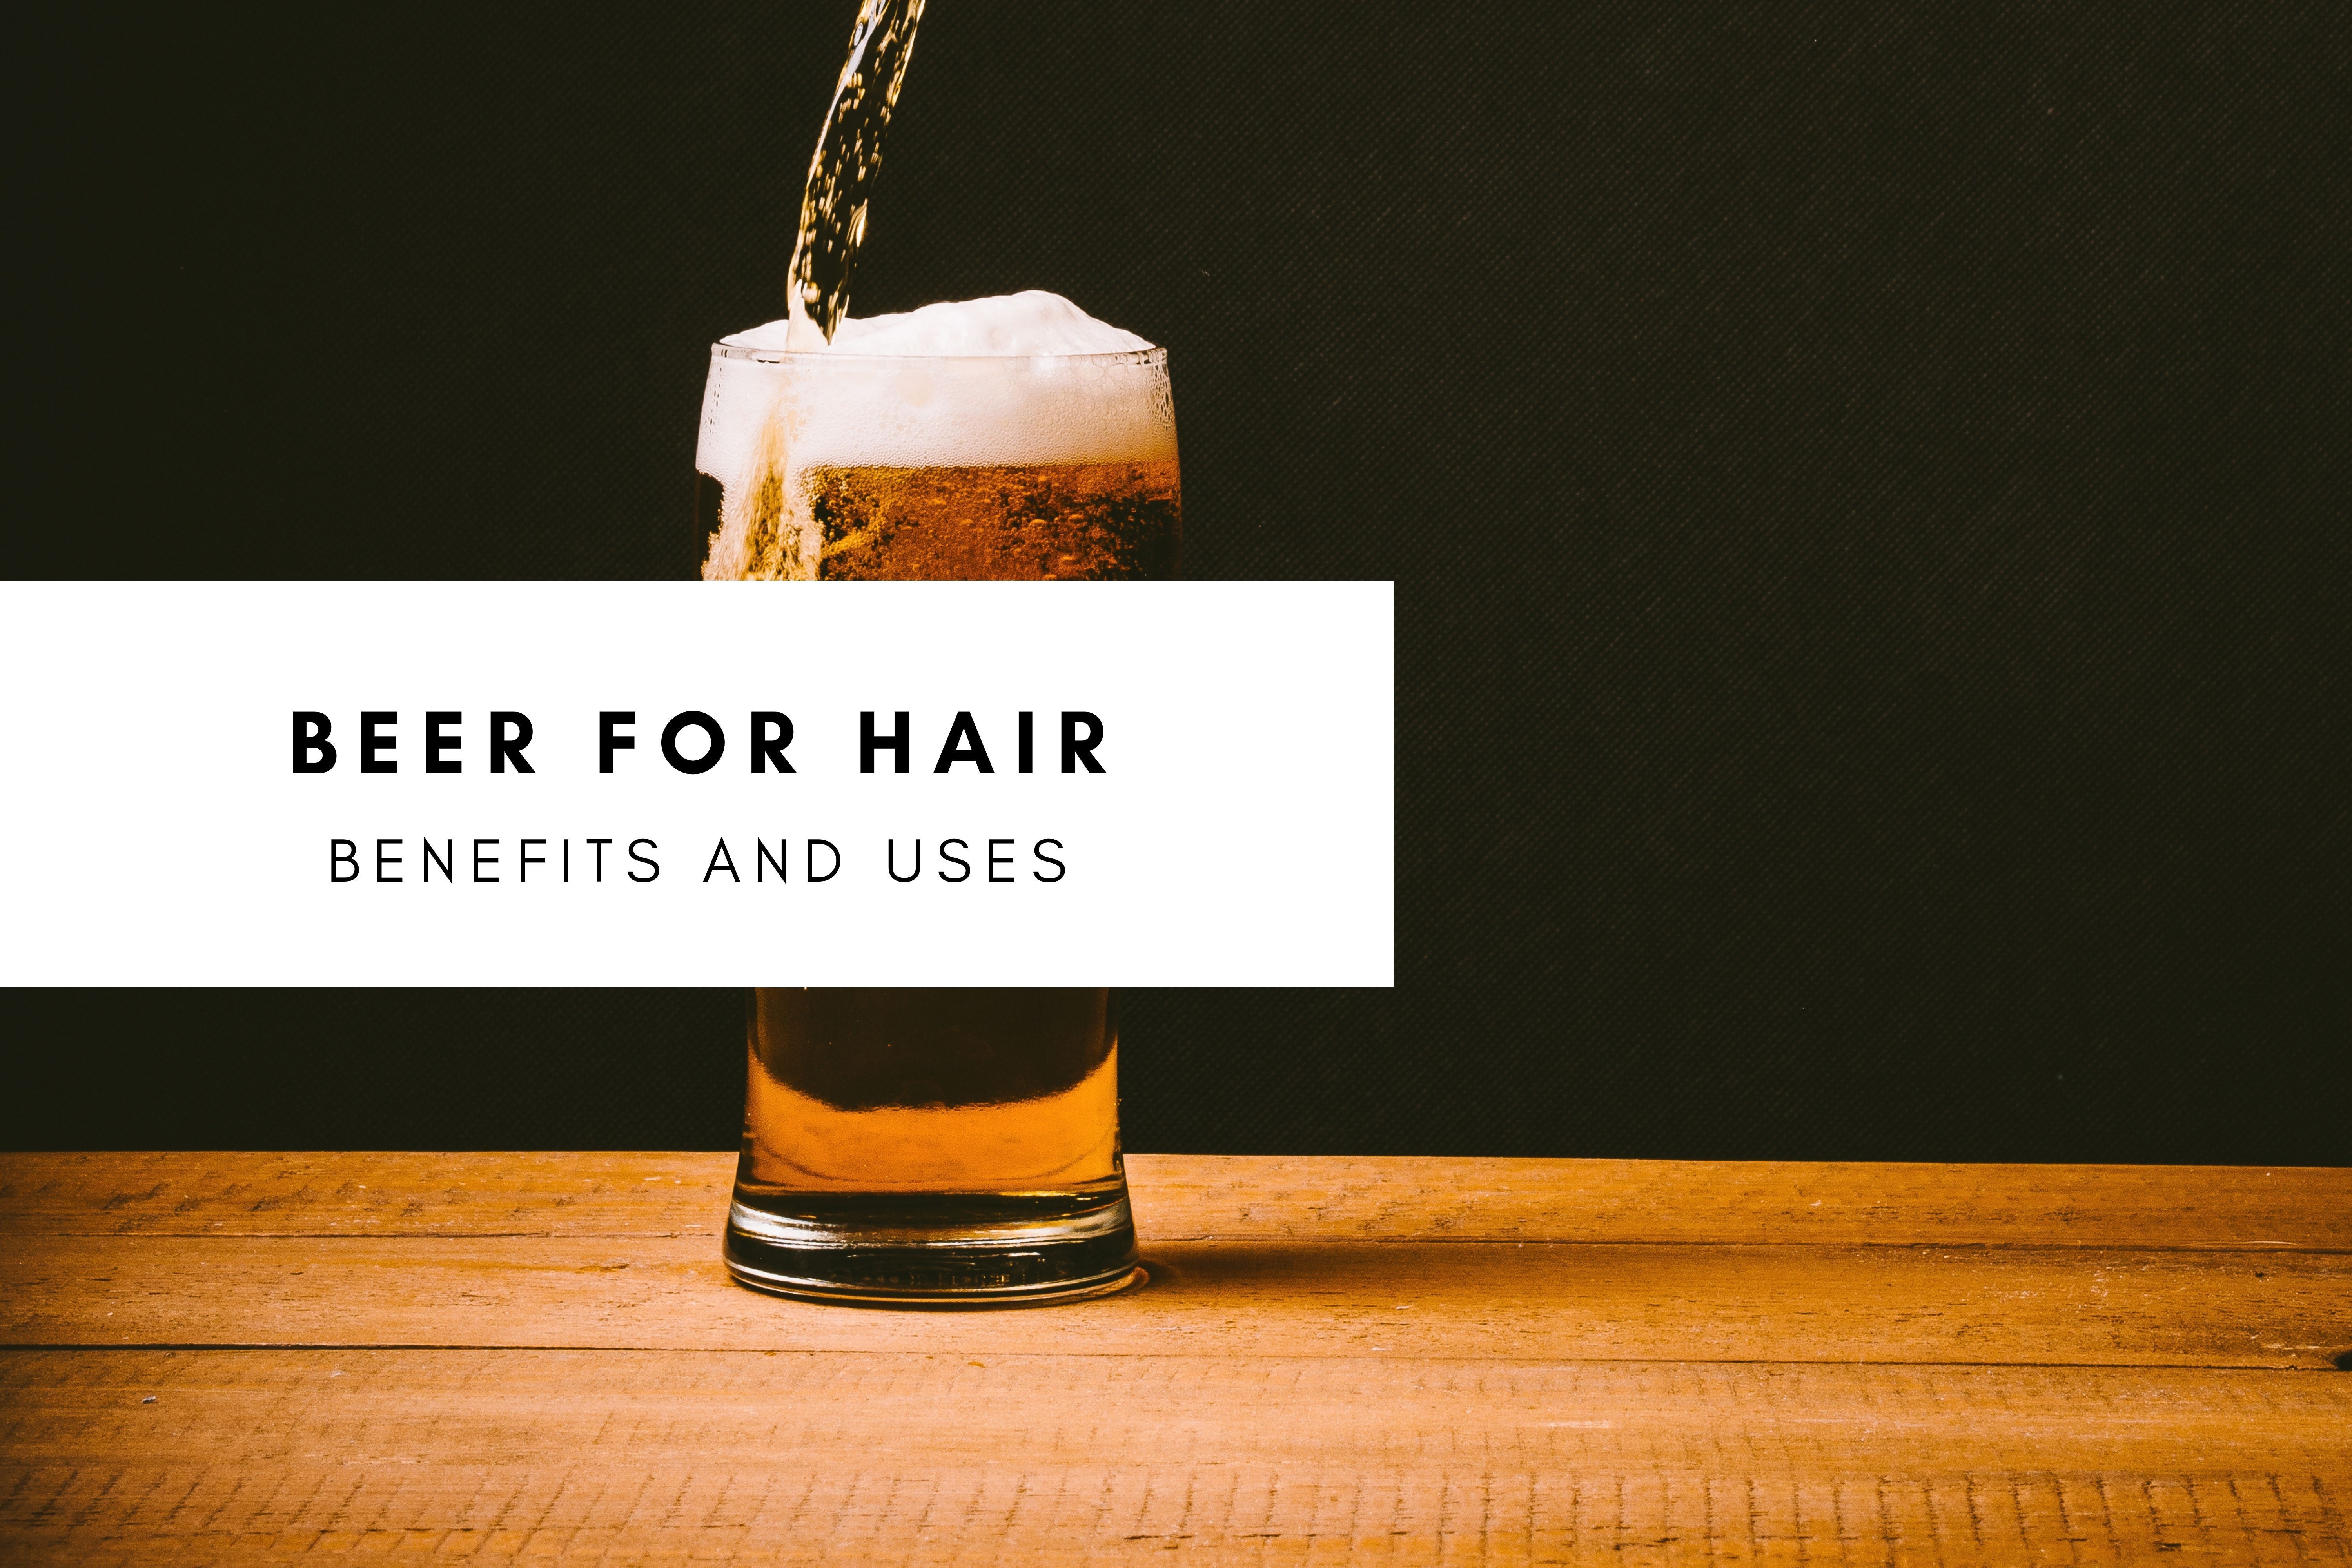 Is Beer Good for Hair? – Go Through the Details to Find Out